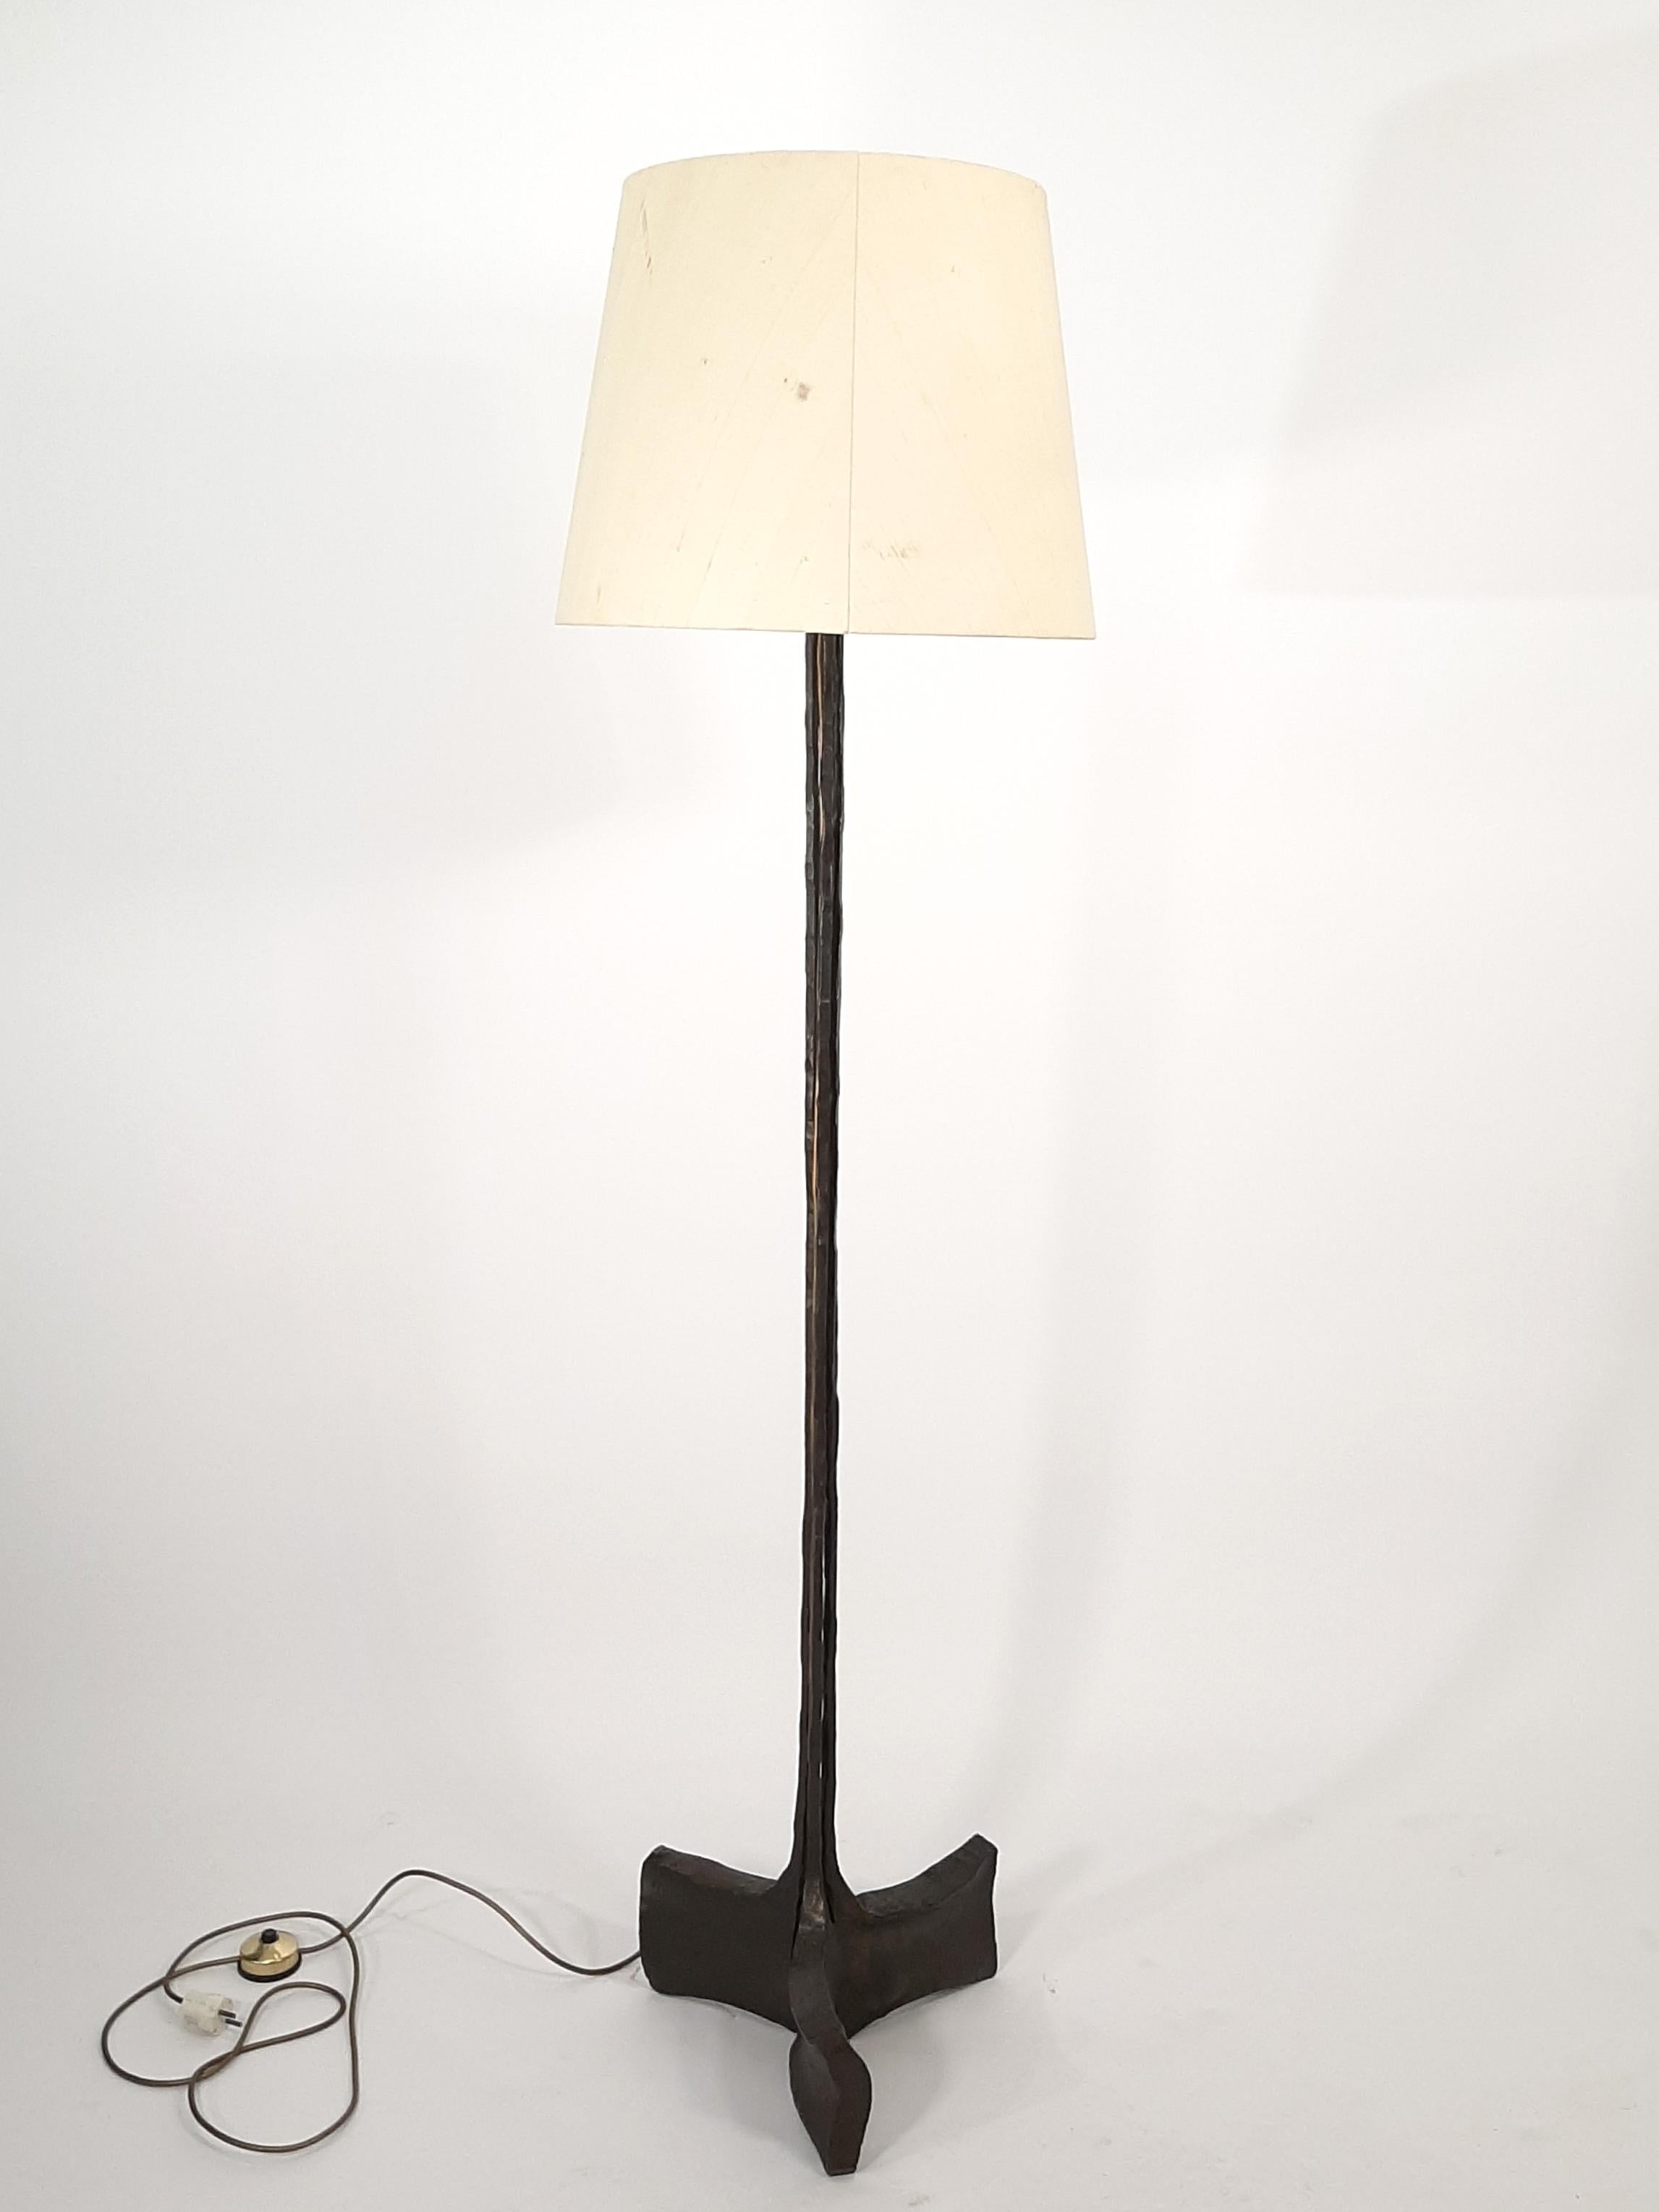 Rare Floor lamp by Lothar Klute, a certificate of authenticity issued by the Klute family is also attached. The height at the level of the bulbs is adjustable by an ingenious system. Original condition , shade and wired. 